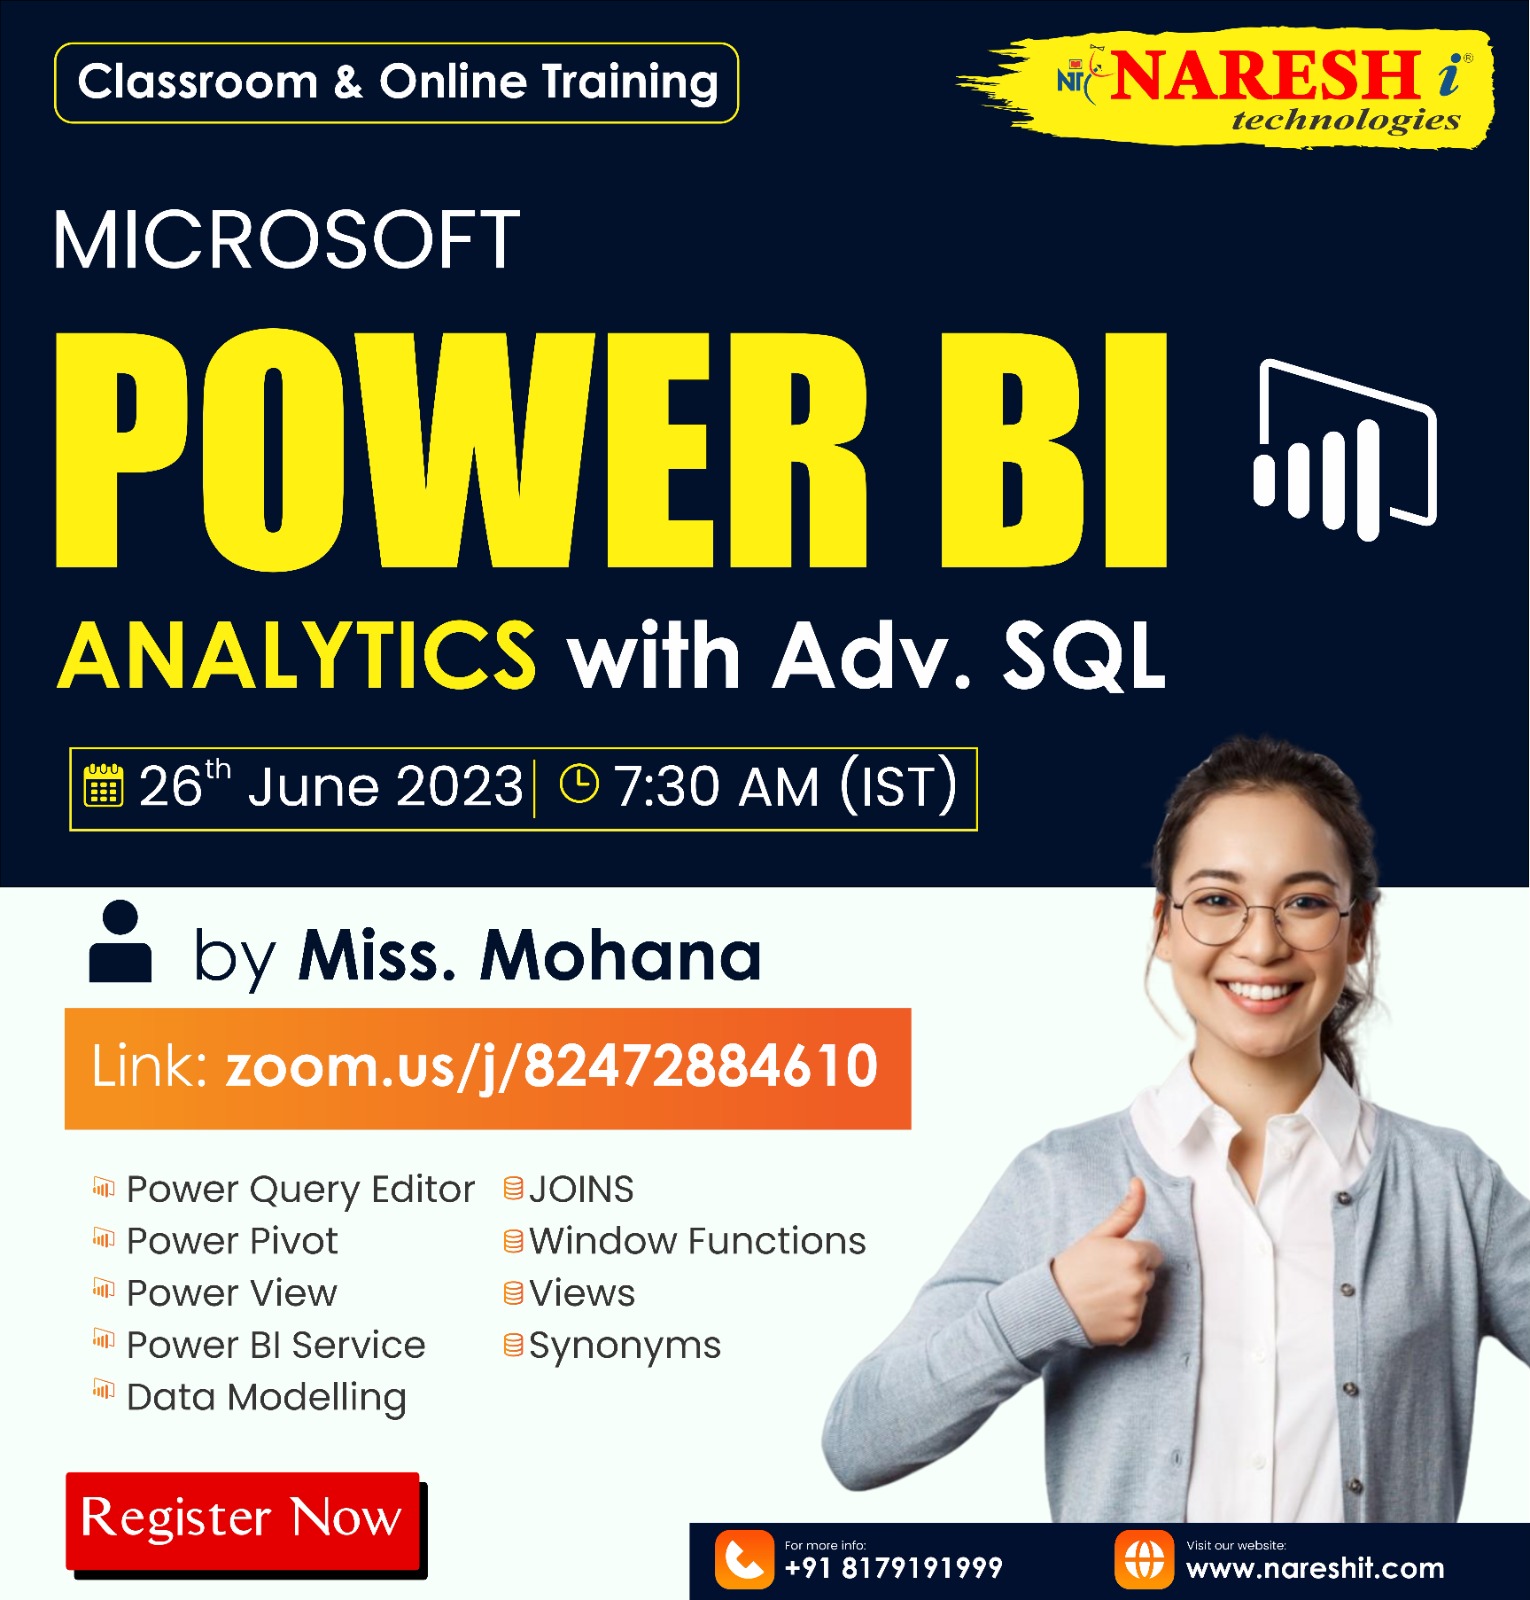 Free Demo On Power BI by Miss Mohana - Naresh IT, Online Event